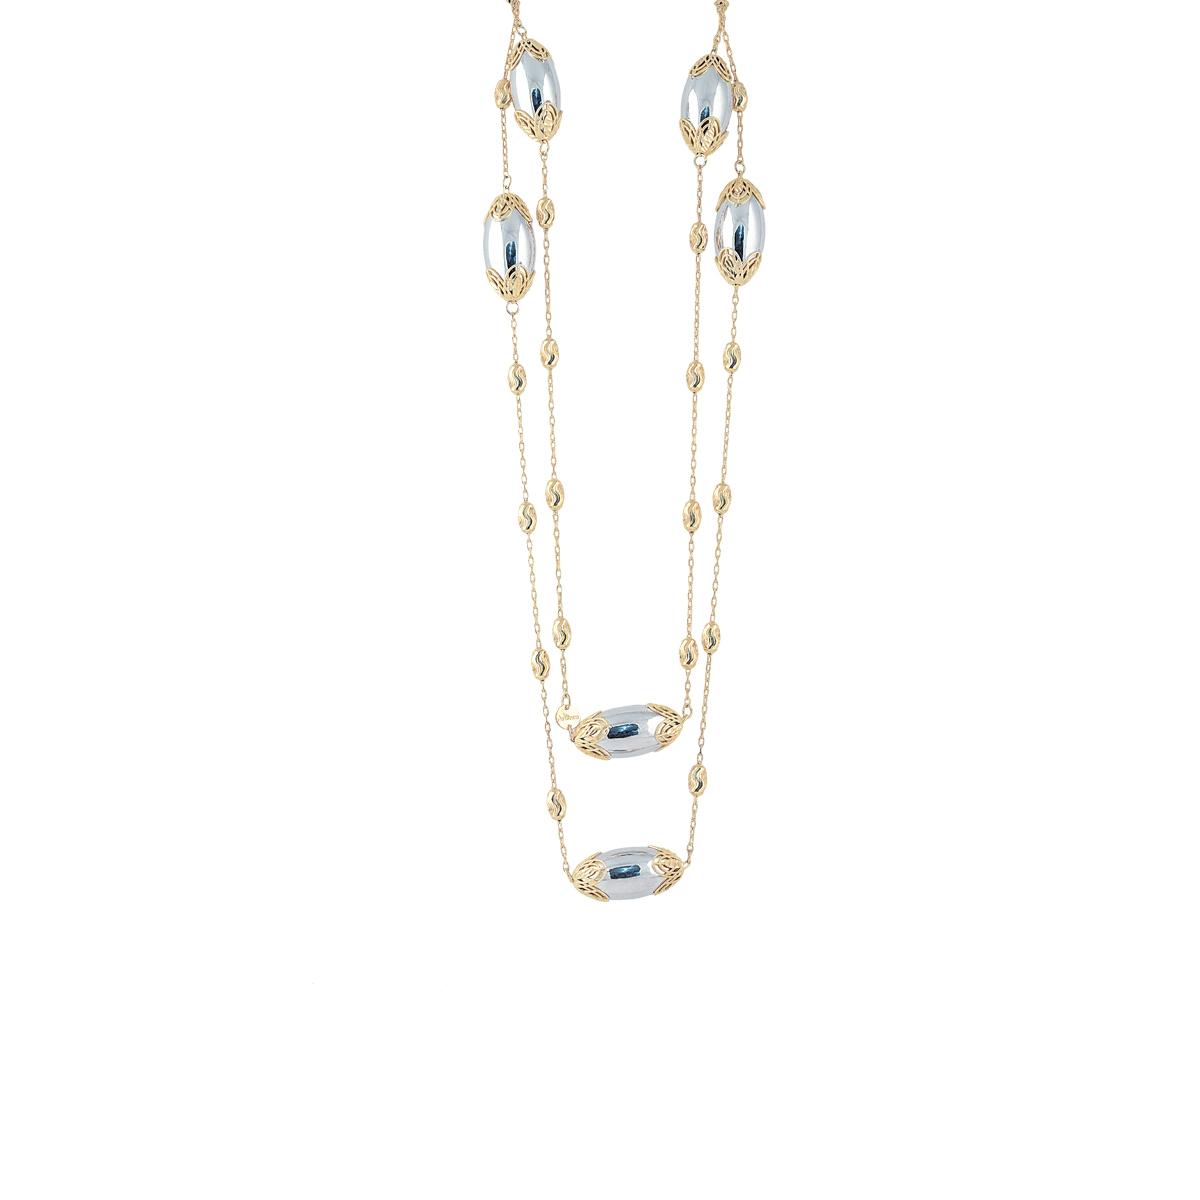 Chanel necklace in gold and rhodium-plated 925 silver - ZCL971-LN